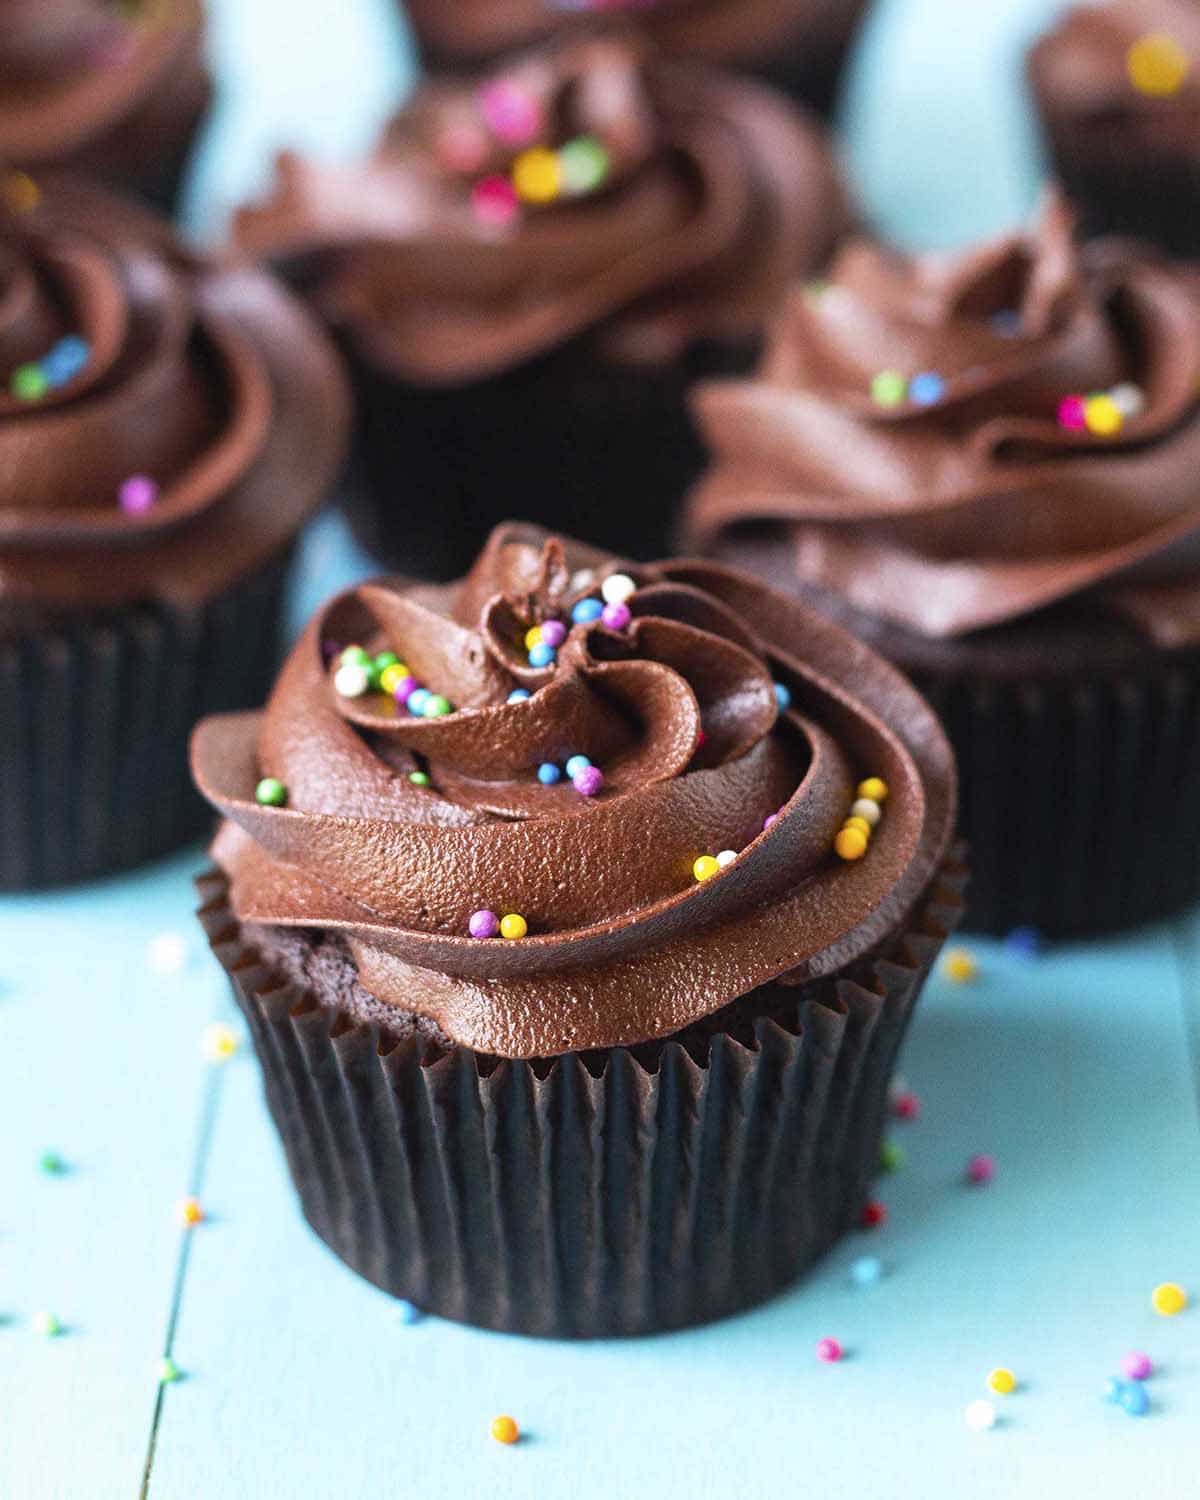 Several frosted chocolate cupcakes with sprinkles on top sitting on a blue table.